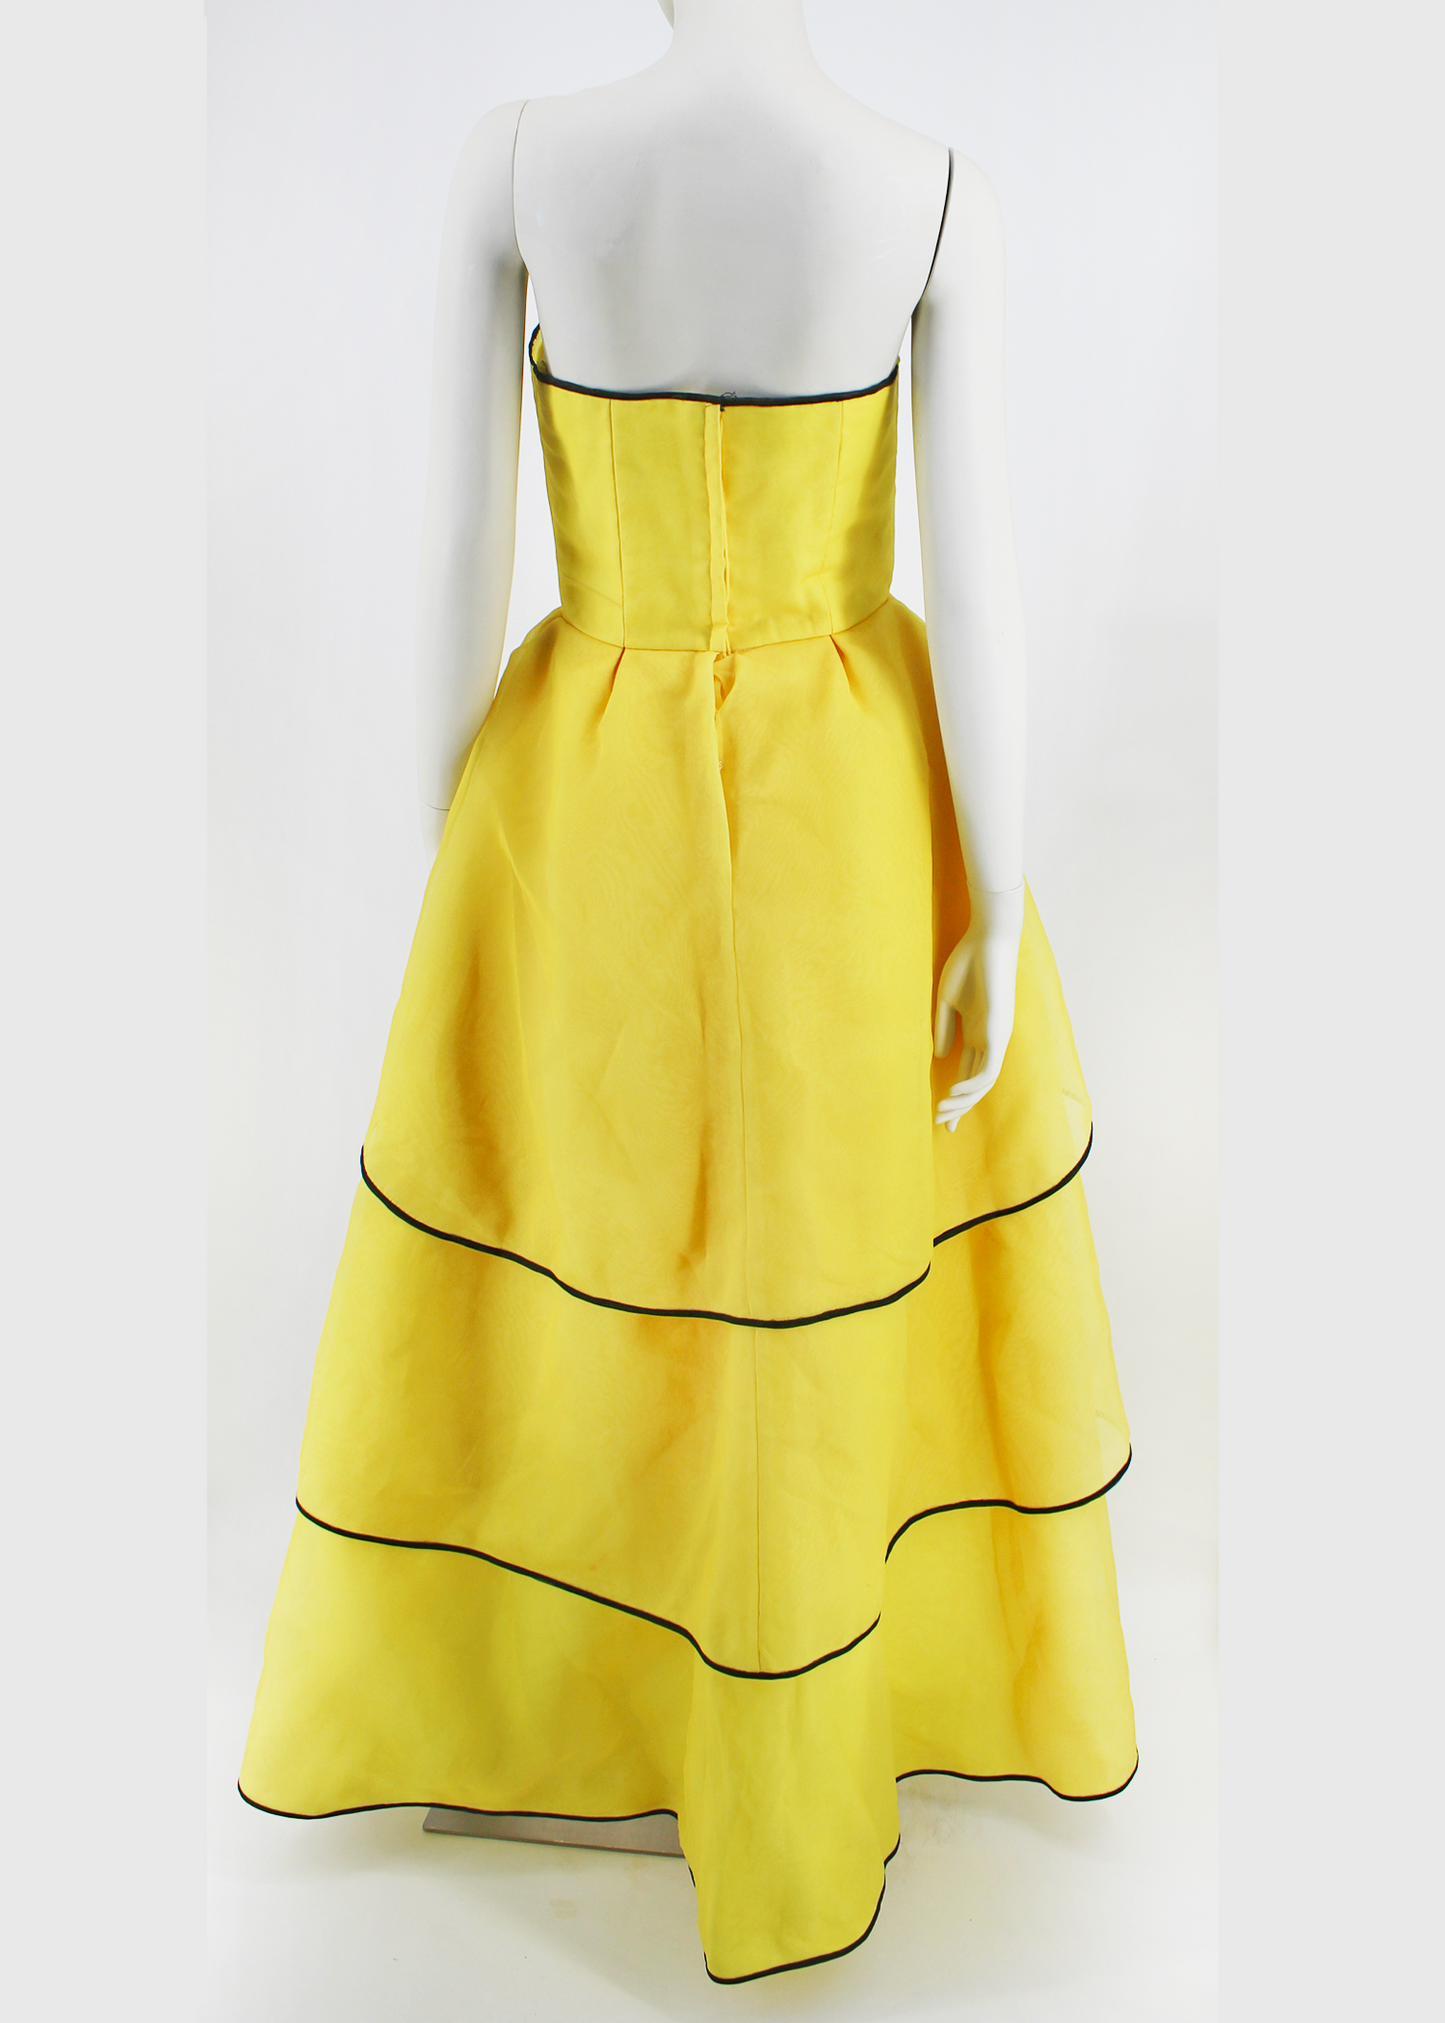 An absolutely breathtaking Victor Costa gown from the 1960s featuring layers of bright yellow organza, an architectural bodice, black piping along the hem of every layer of the dresses skirt and neckline, and an oversized black flower embellishment at front. Slightly higher in the front than in the back.